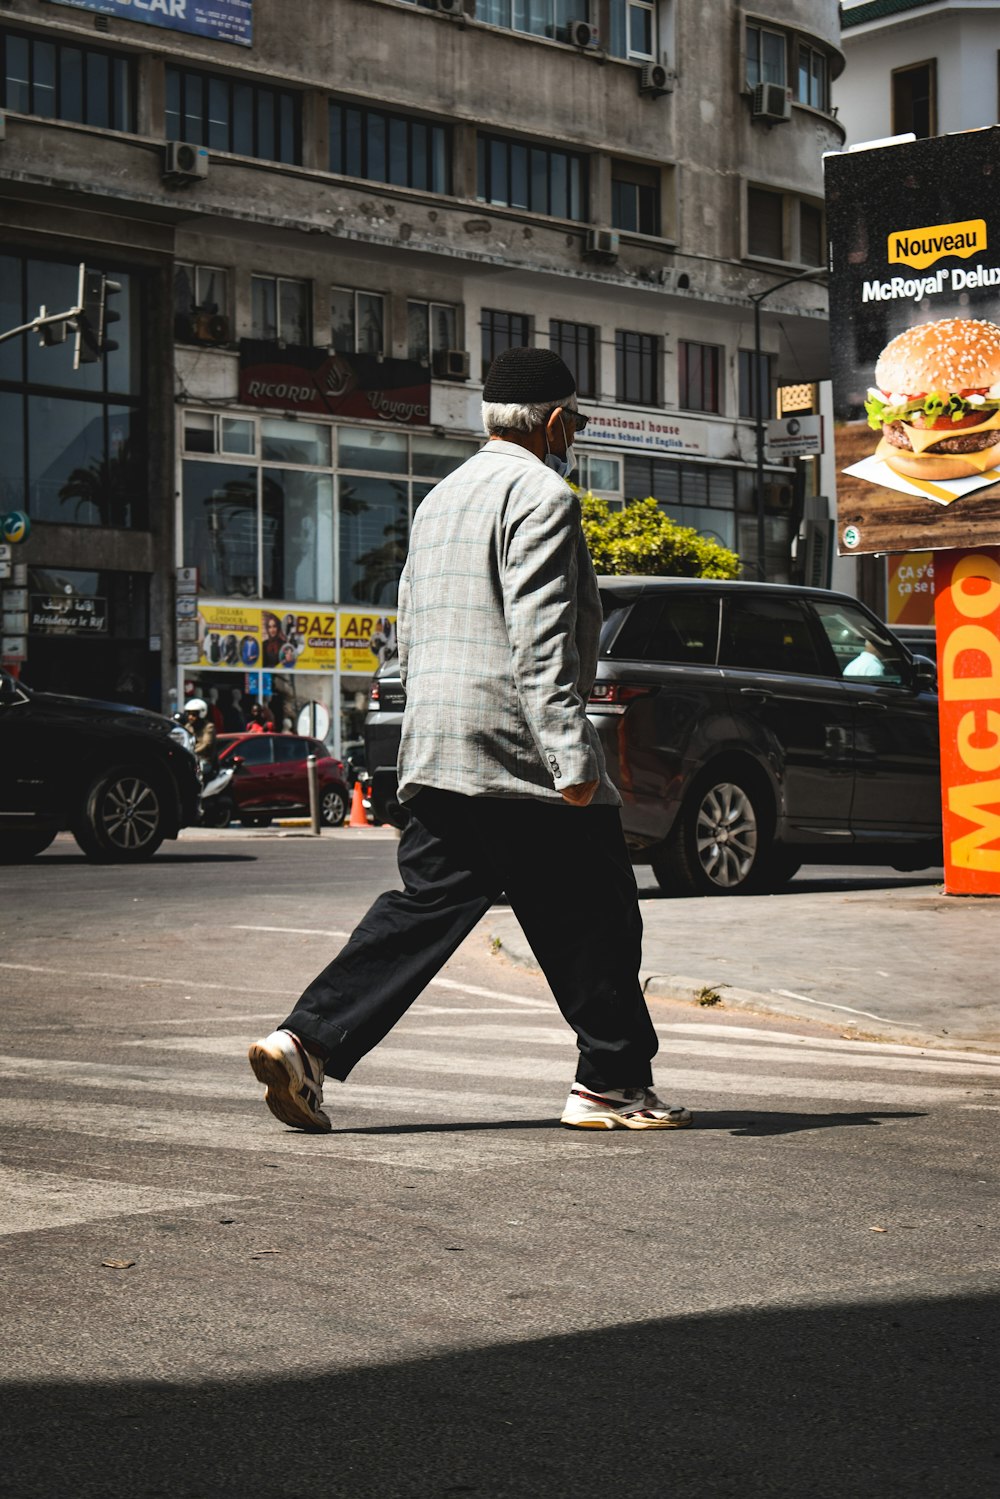 a man walking across a street in front of a burger